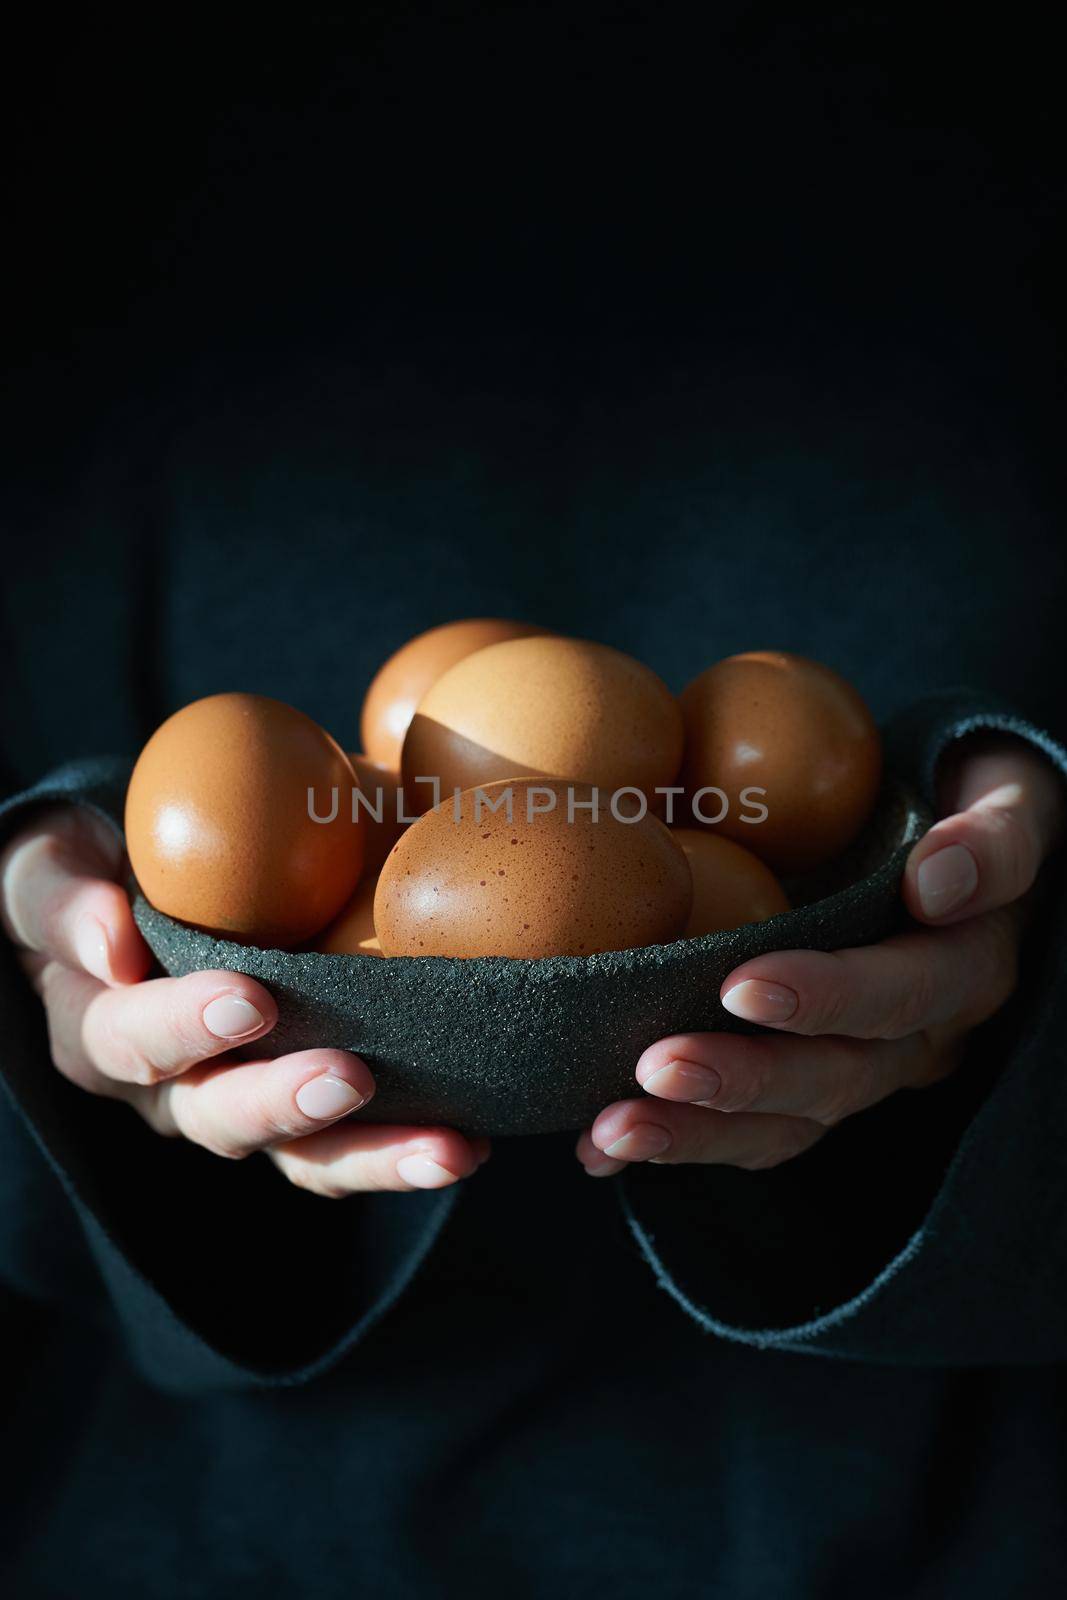 Unusual Easter on dark background. Bowl of brown eggs with hands, vertical by NataBene